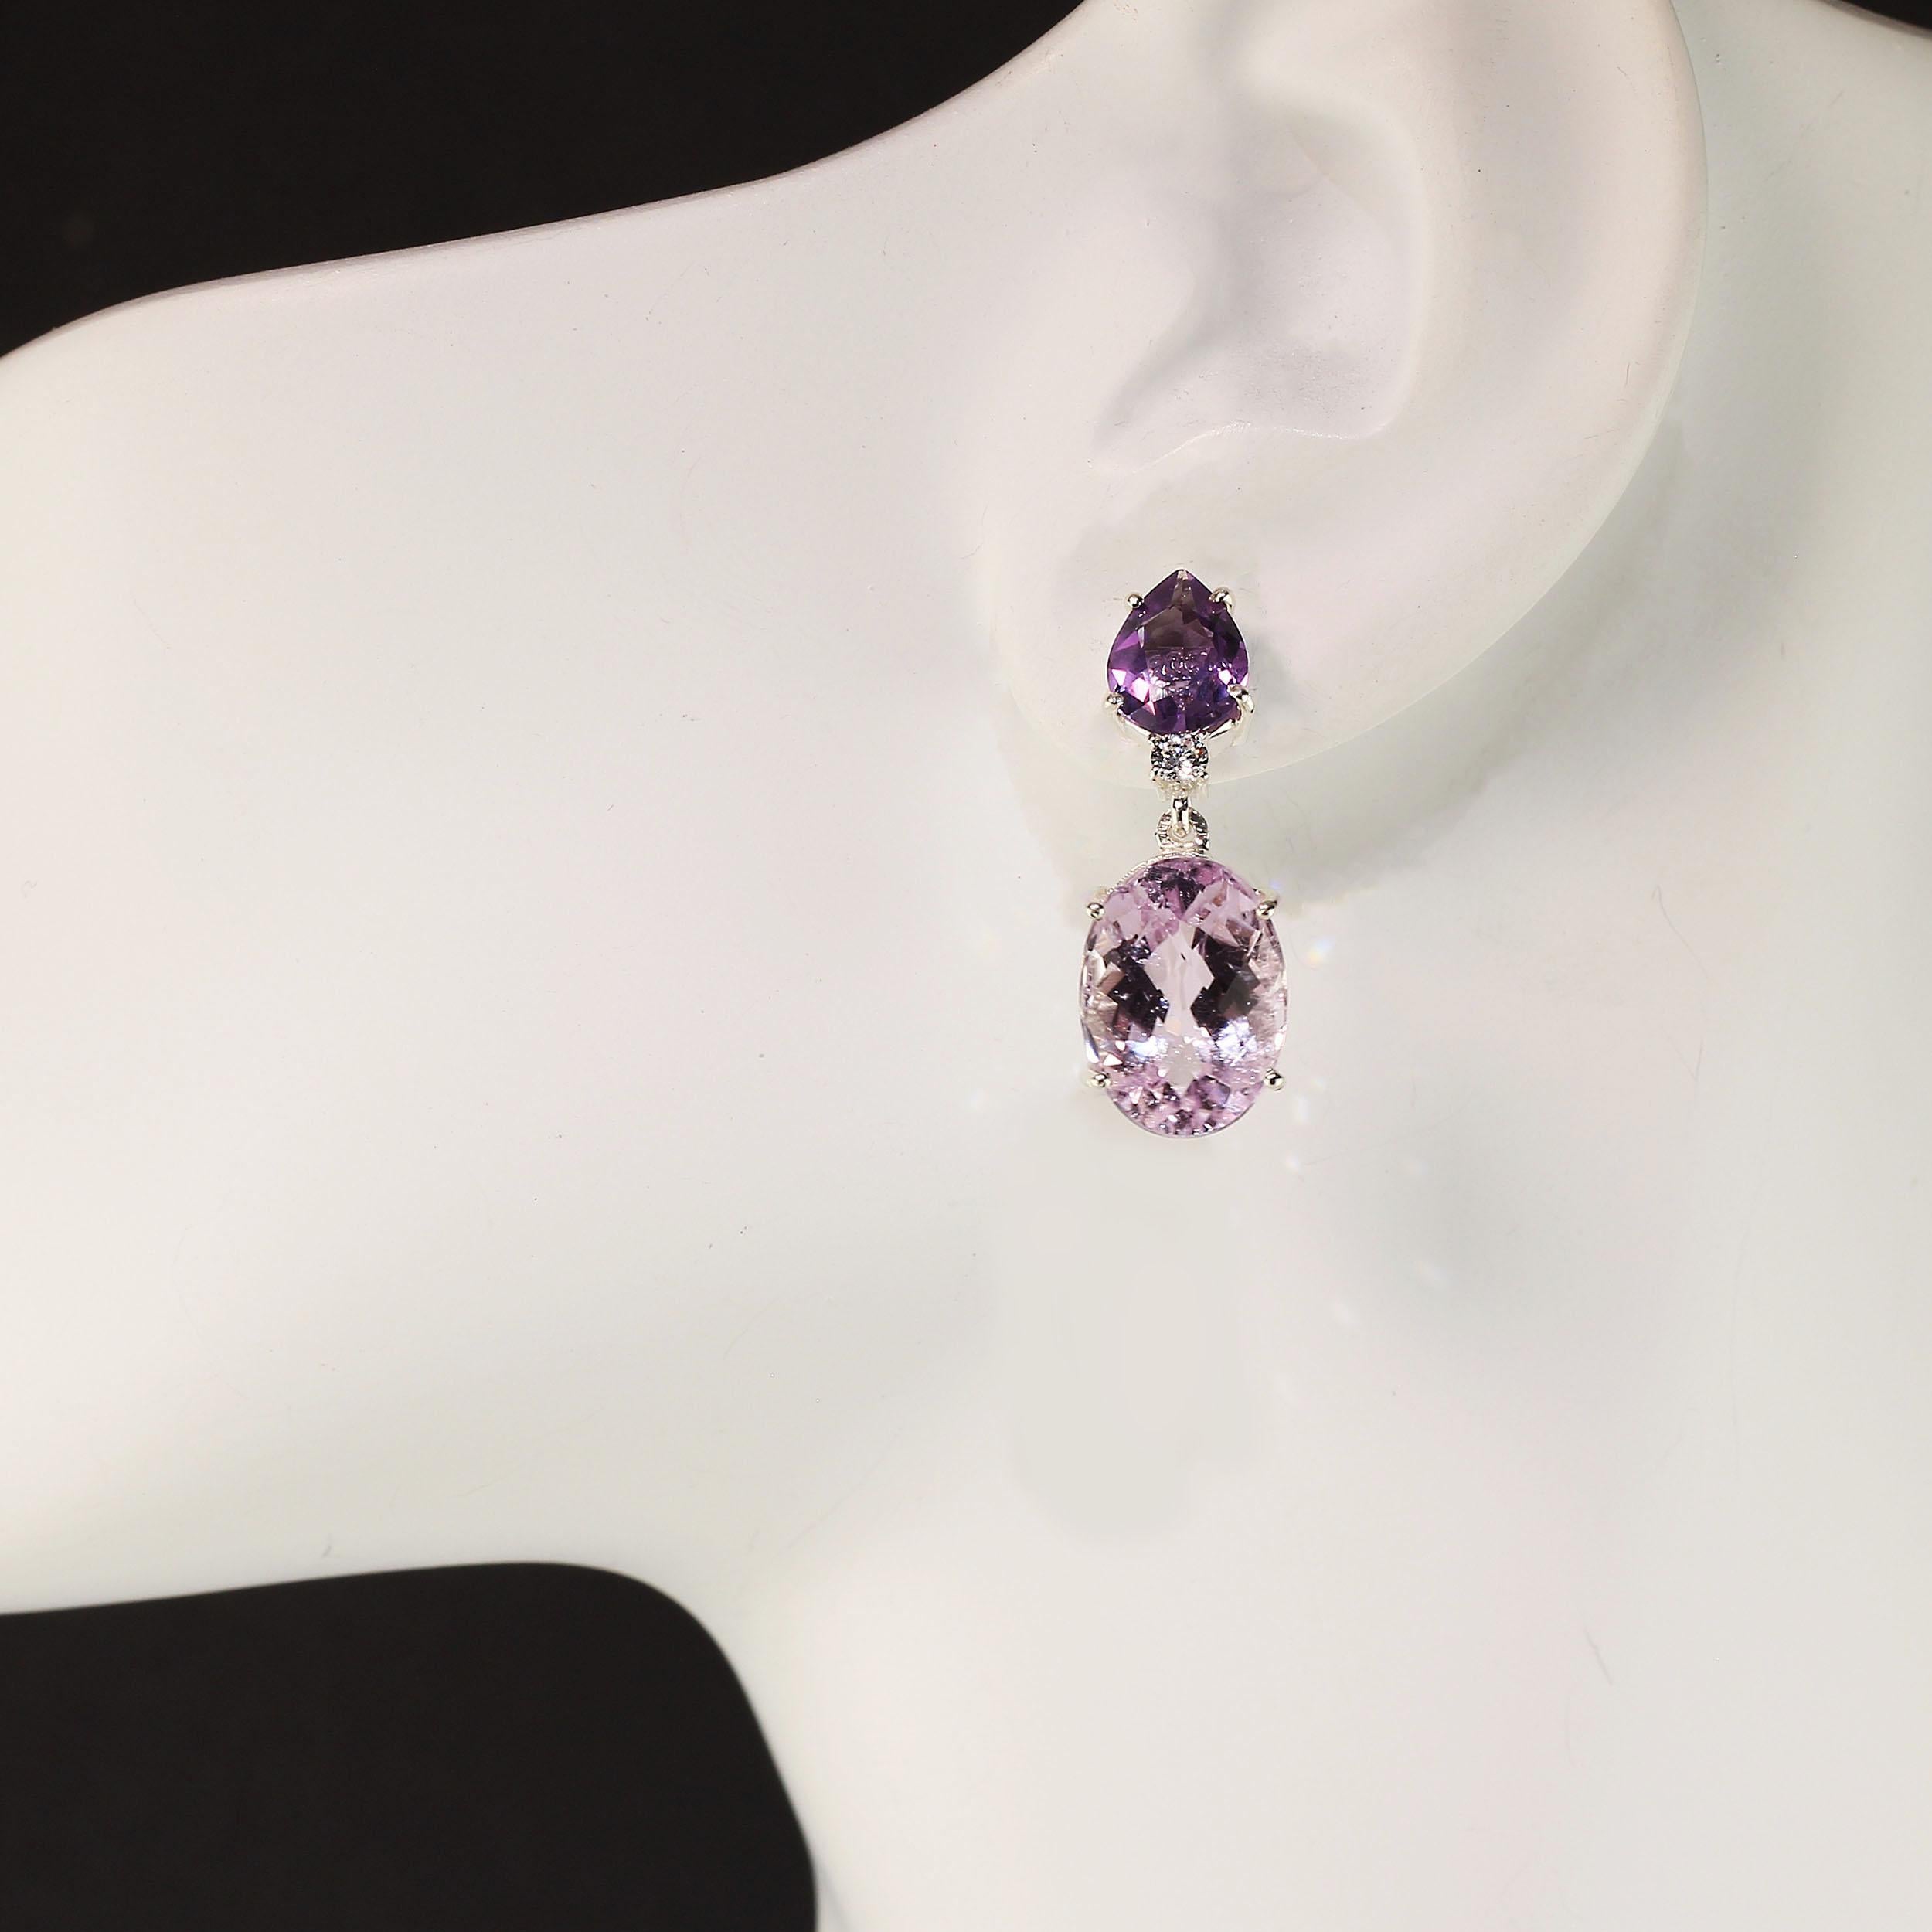 Wear these happy, warm earrings from day to evening.  Lively pink Kunzite ovals swing from pear shaped Amethysts. A sparkling Cambodian Zircon sits just beneath the Amethyst to further enhance the overall look of these one inch long earrings. These